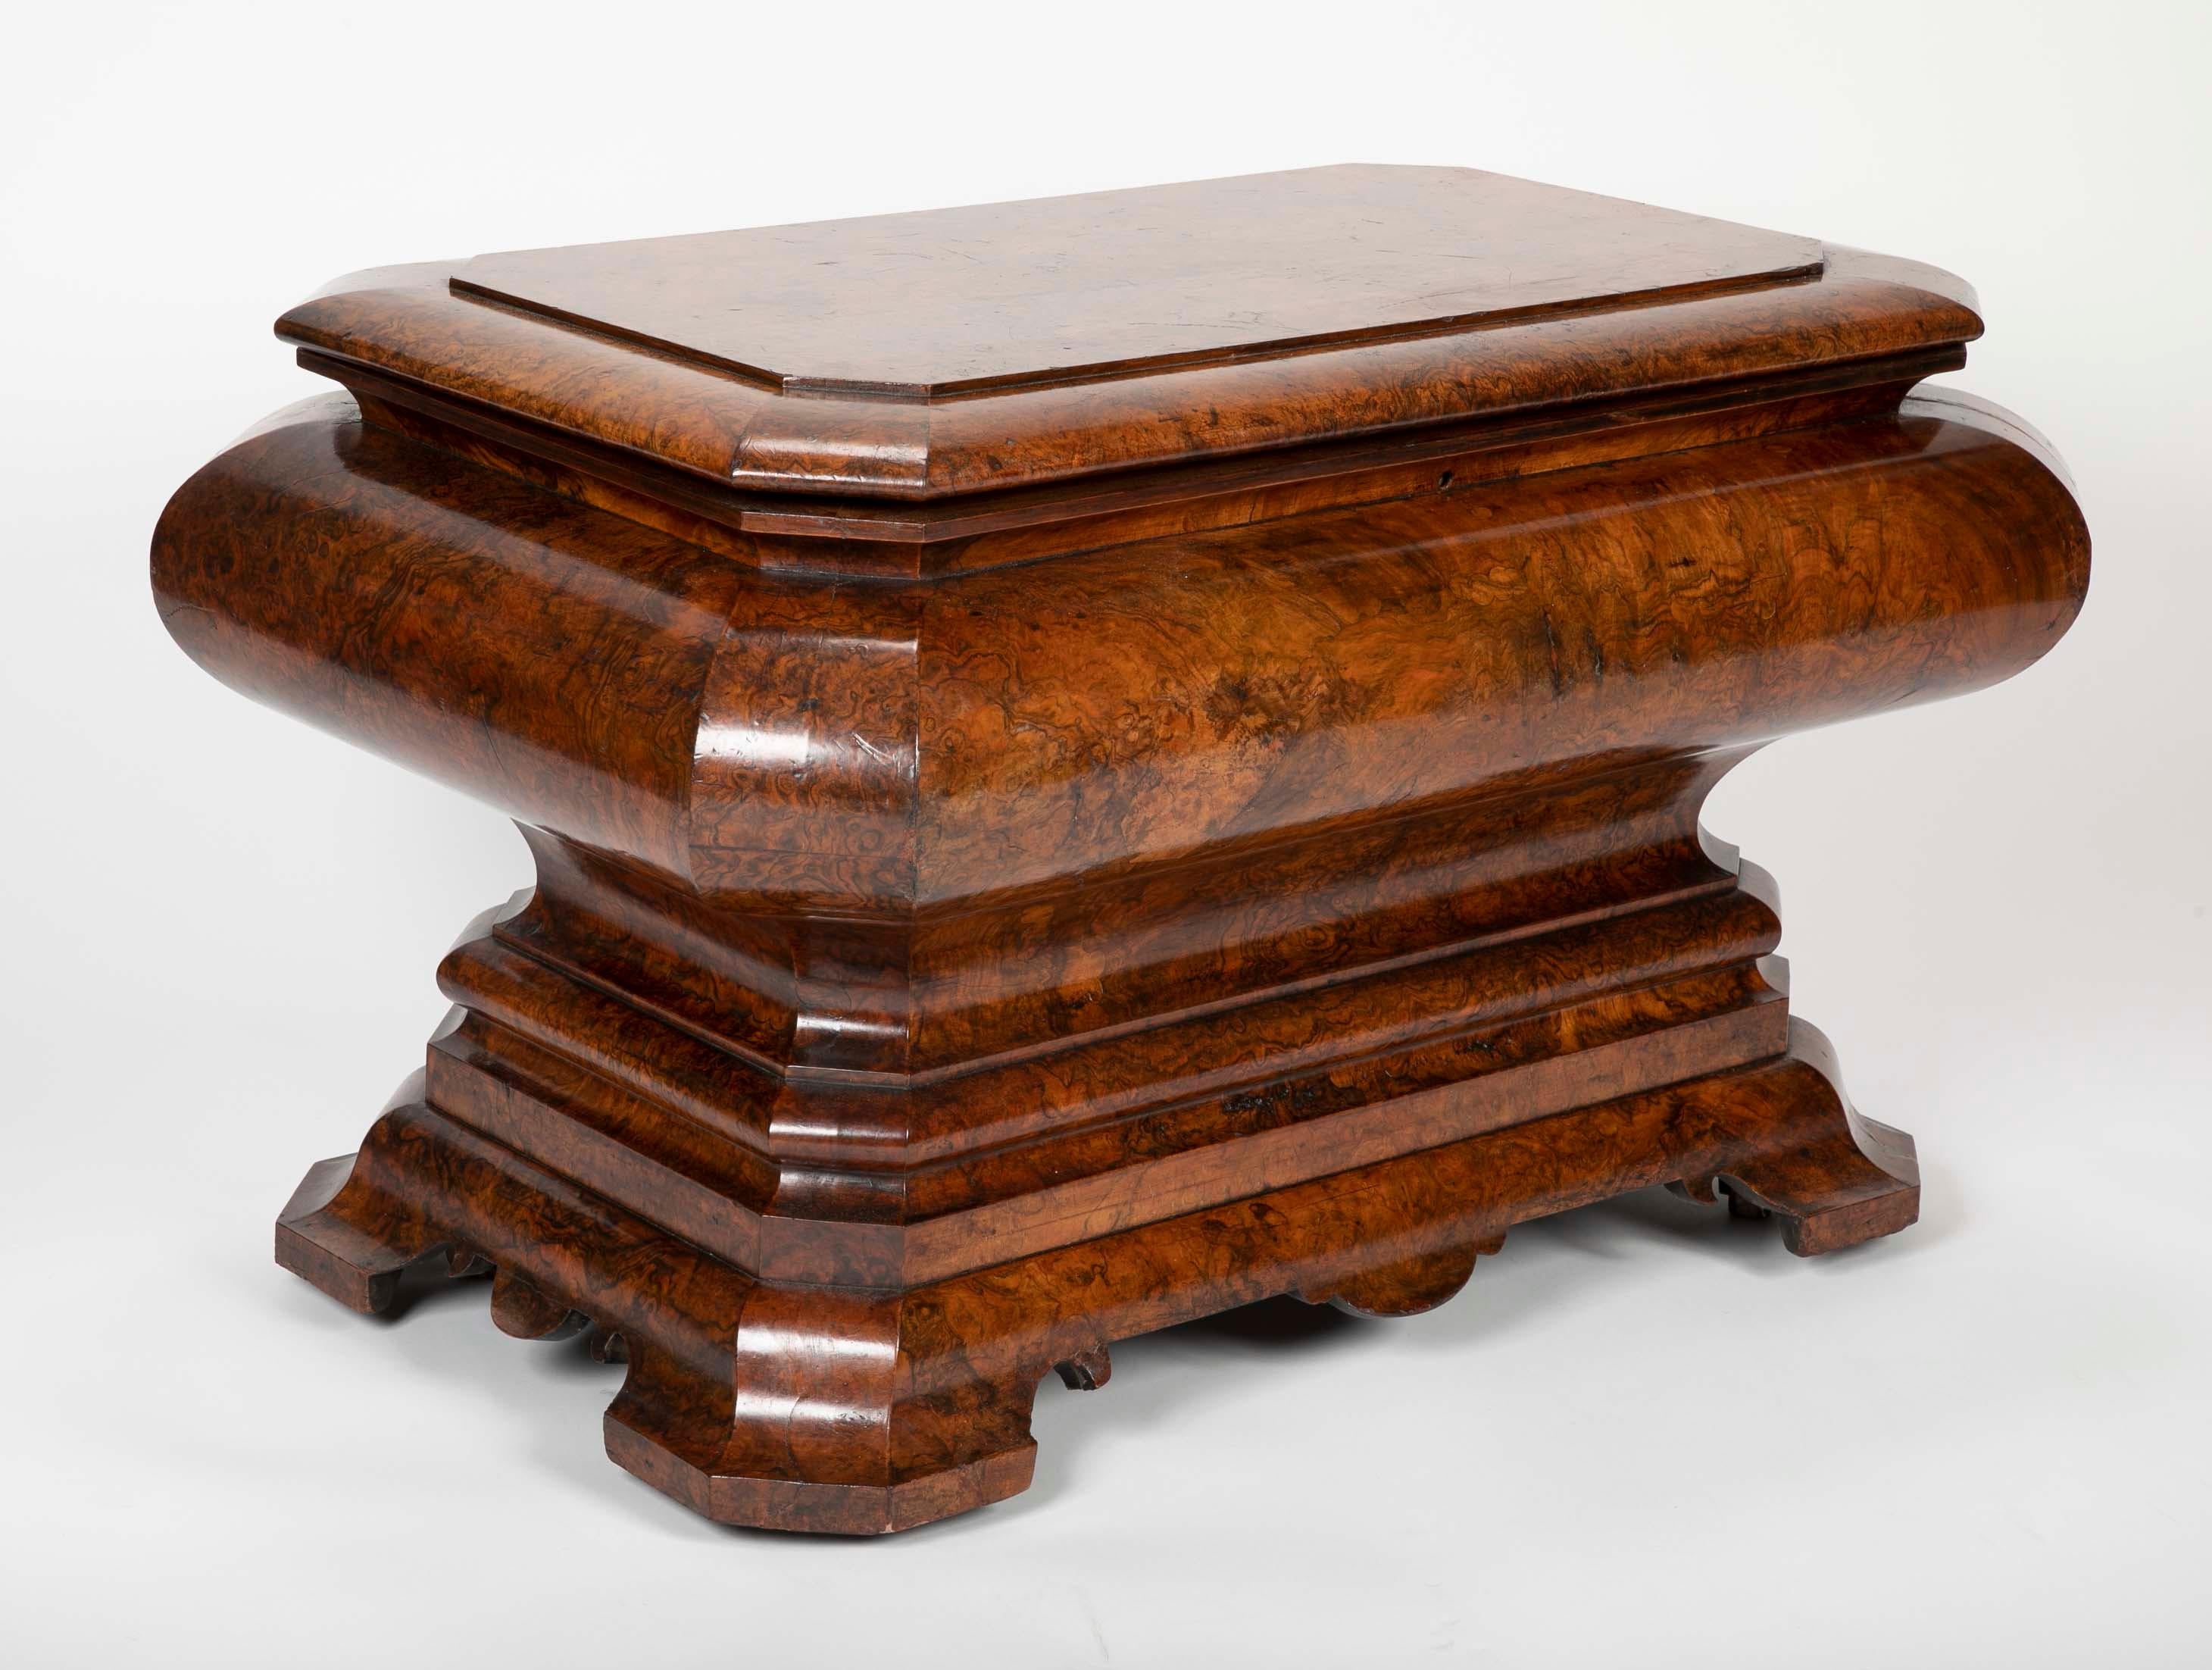 Exceptional English, or possibly Scottish, burl walnut cellarette. The unique form with stunning burl veneer make for a rare and singular piece of furniture. The unusual scale and beauty will be the highlight of any room, used as a very distinctive